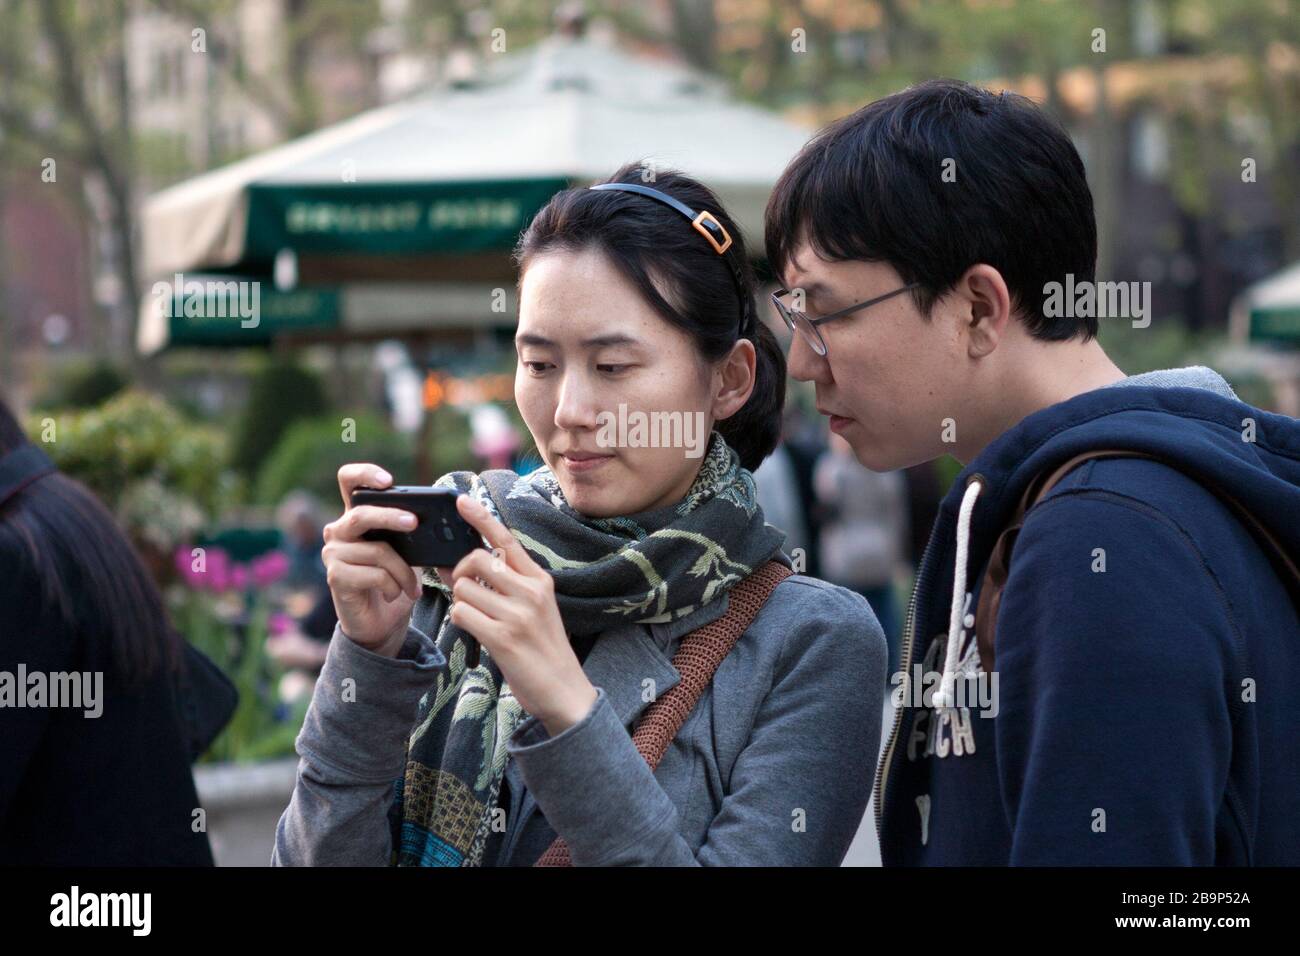 A young couple looks at their phone in Bryant Park in New York City. Stock Photo